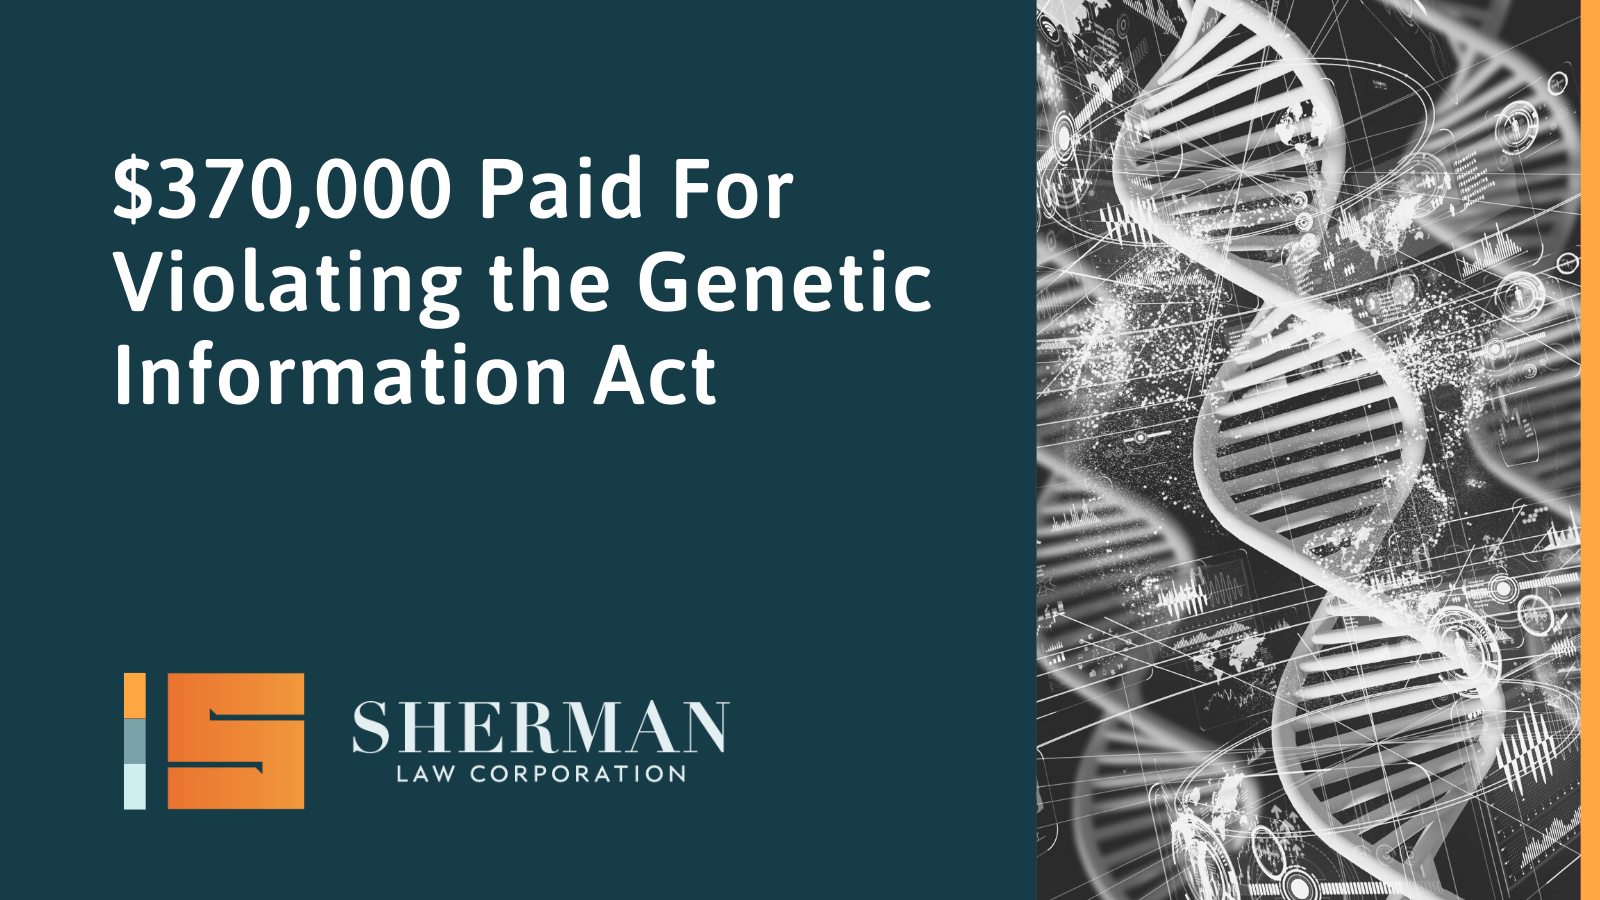 $370,000 Paid For Violating the Genetic Information Act- sherman law corporation